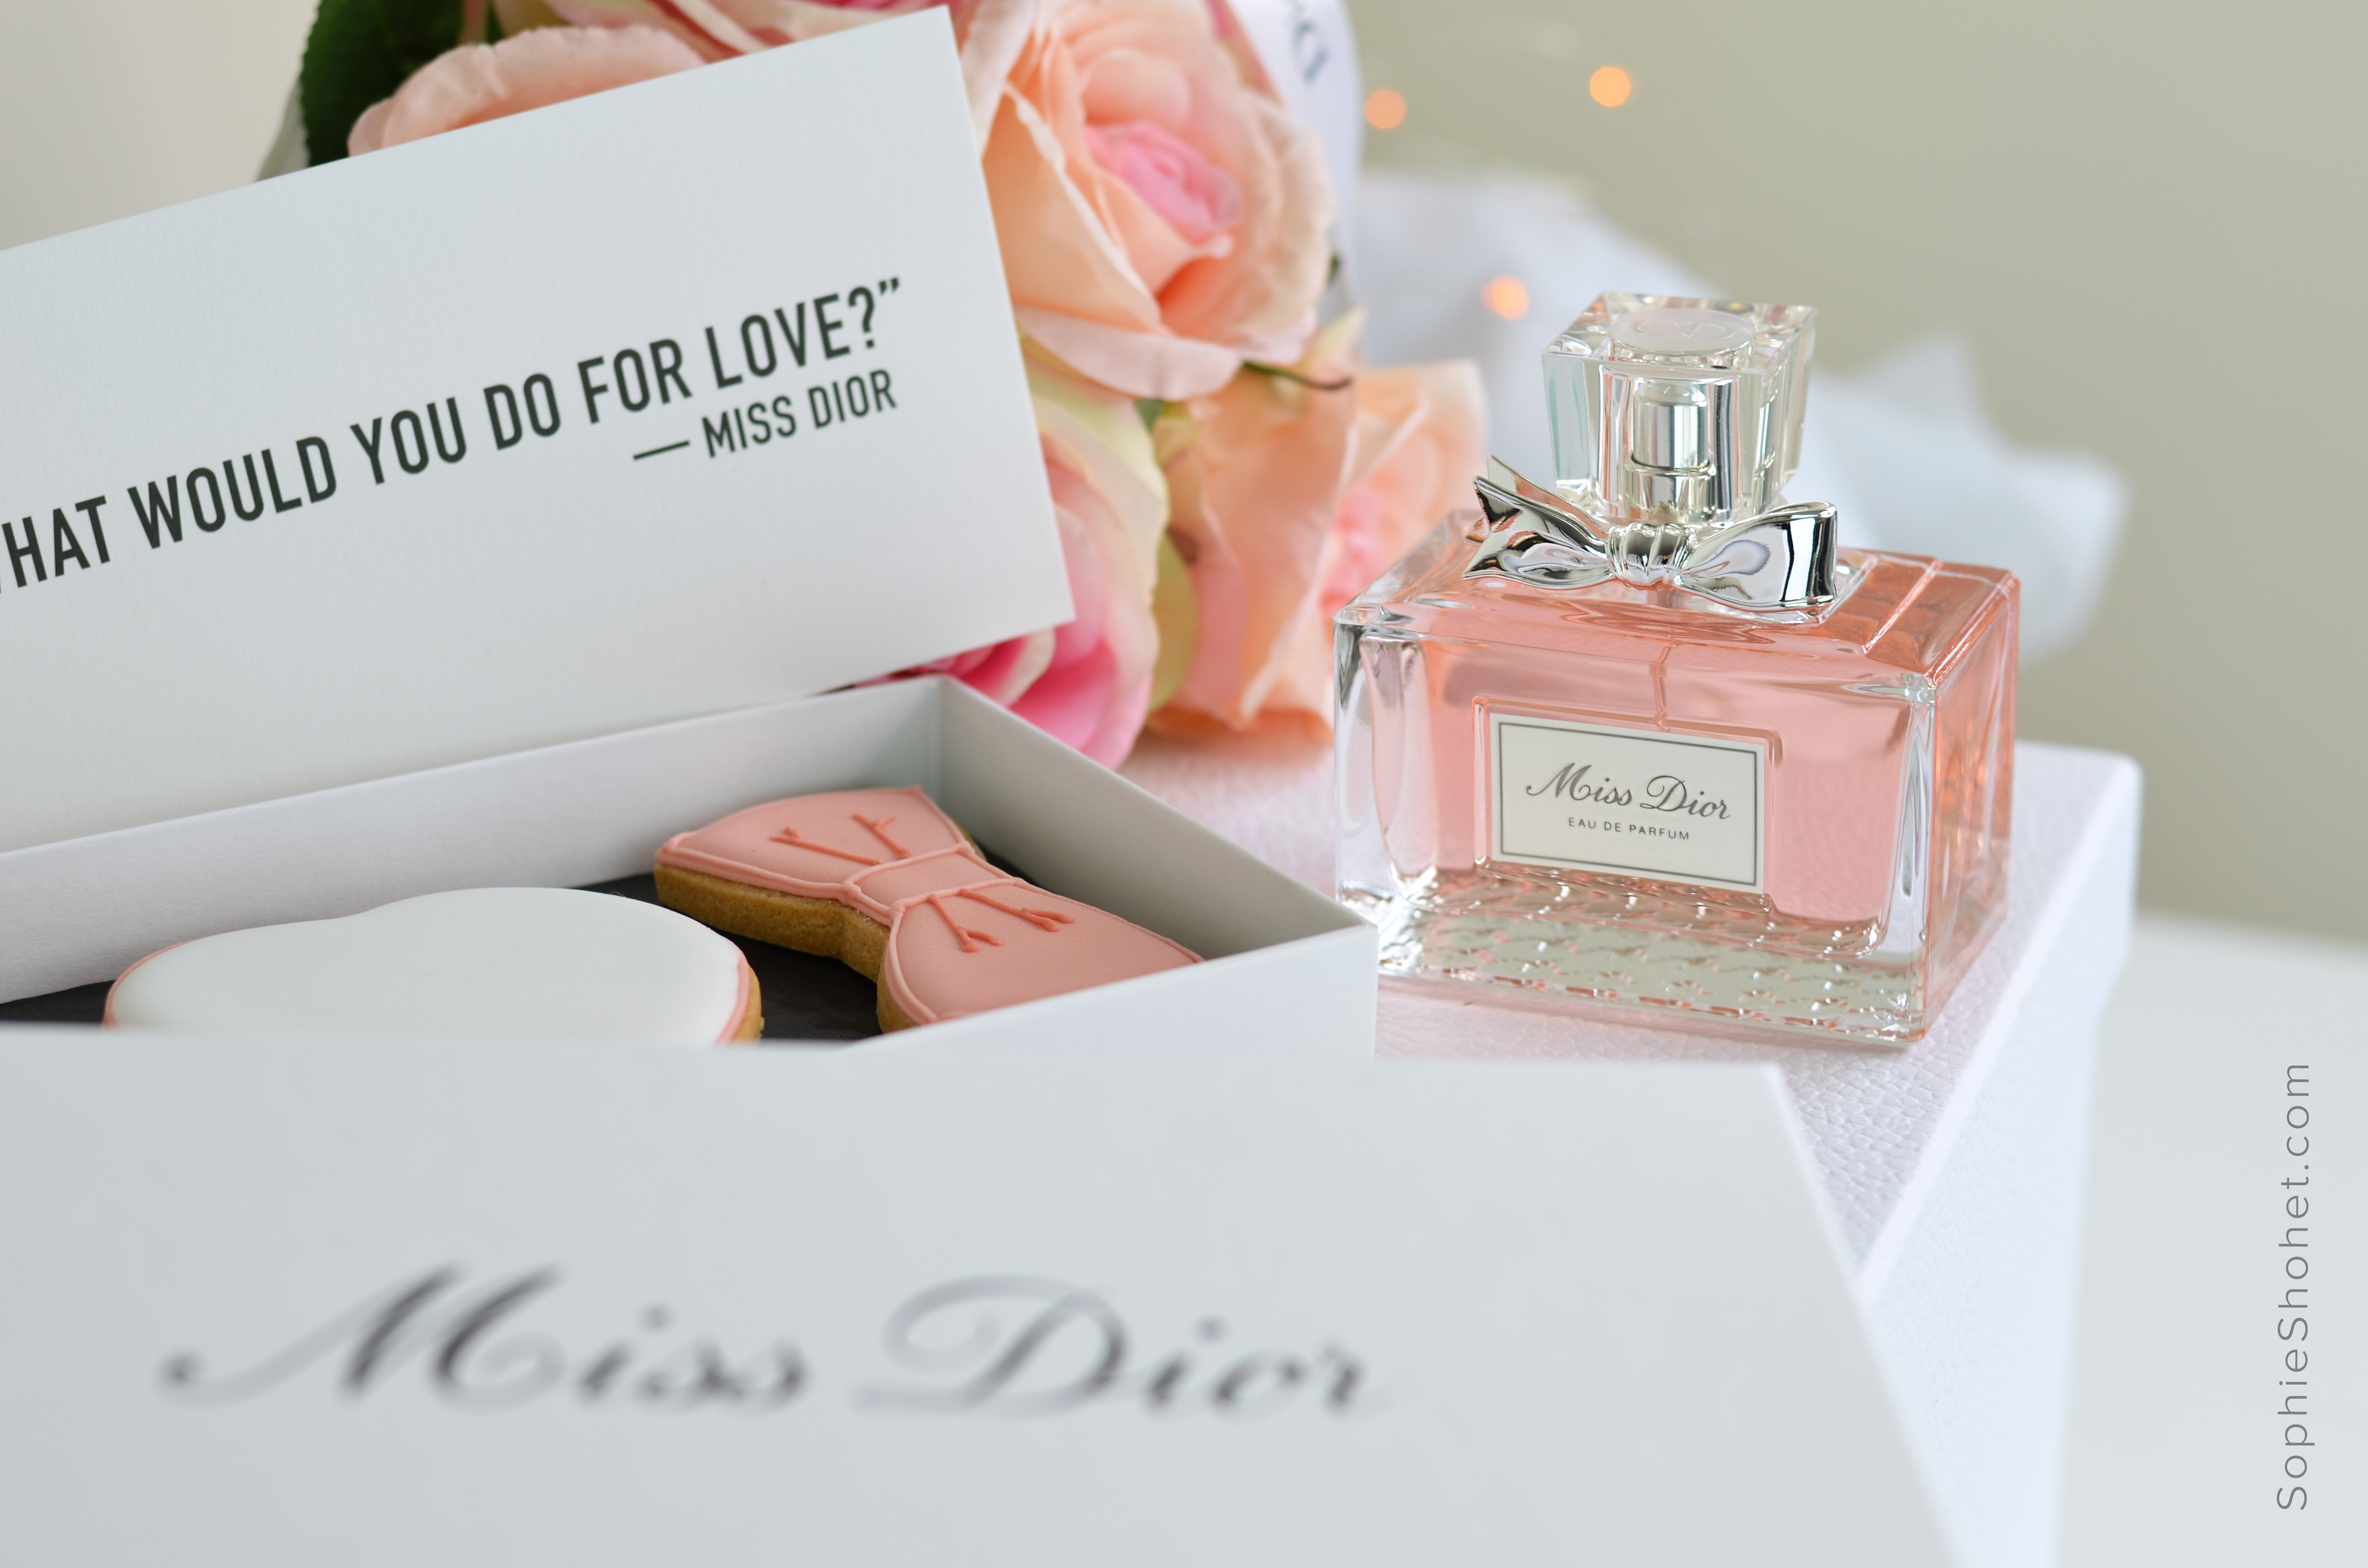 The new 2017 Miss Dior EDP